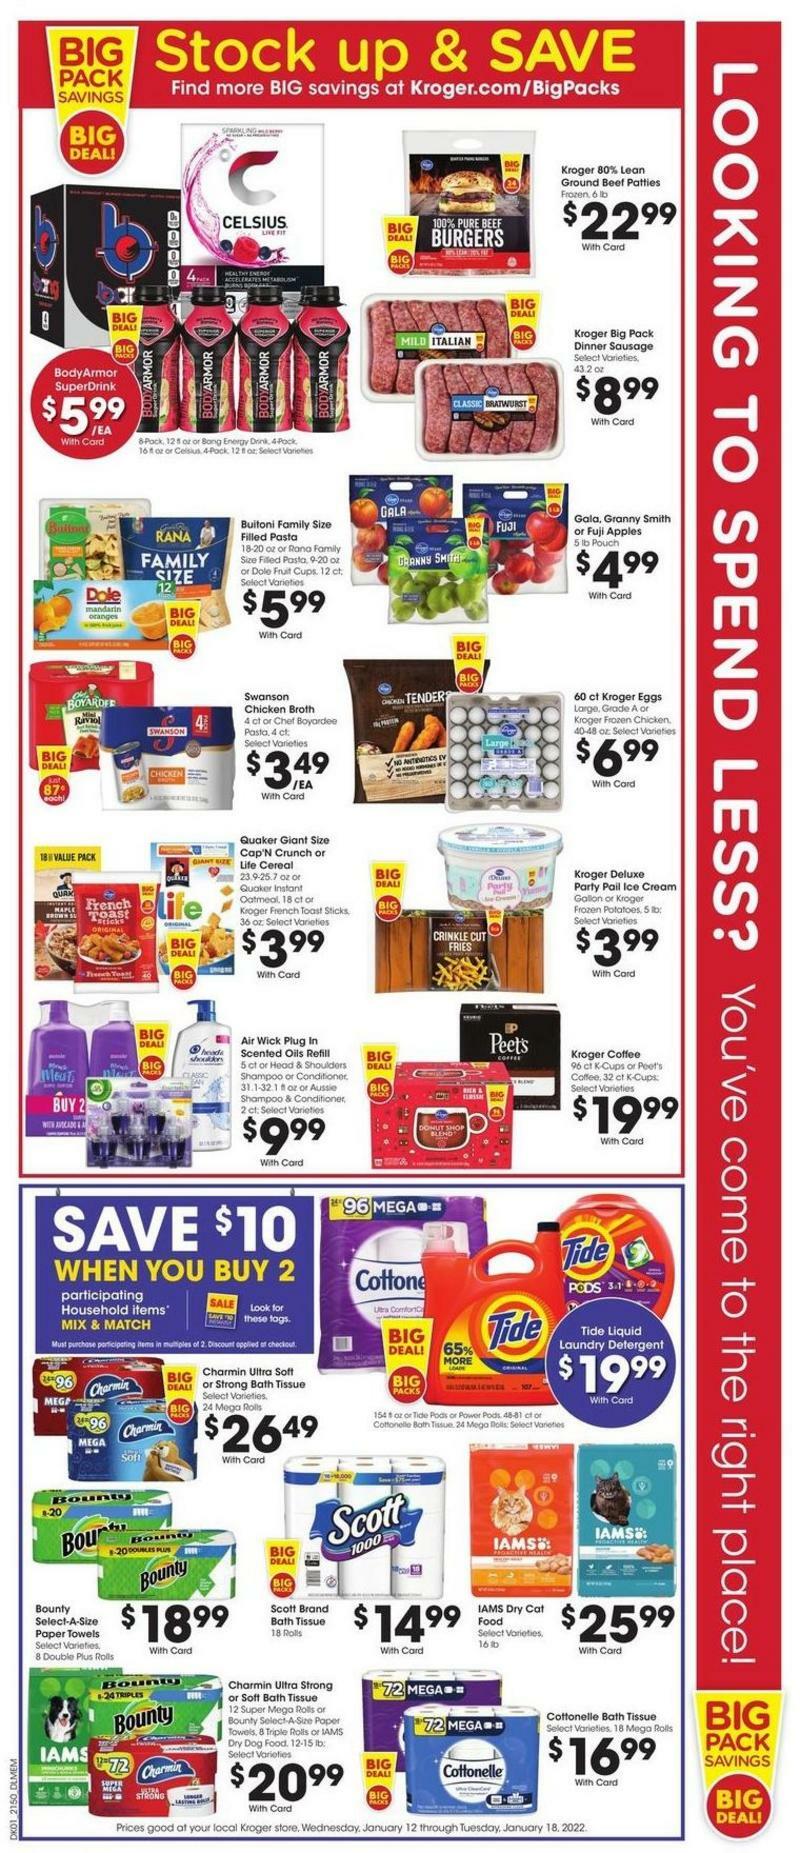 Kroger Weekly Ad from January 12